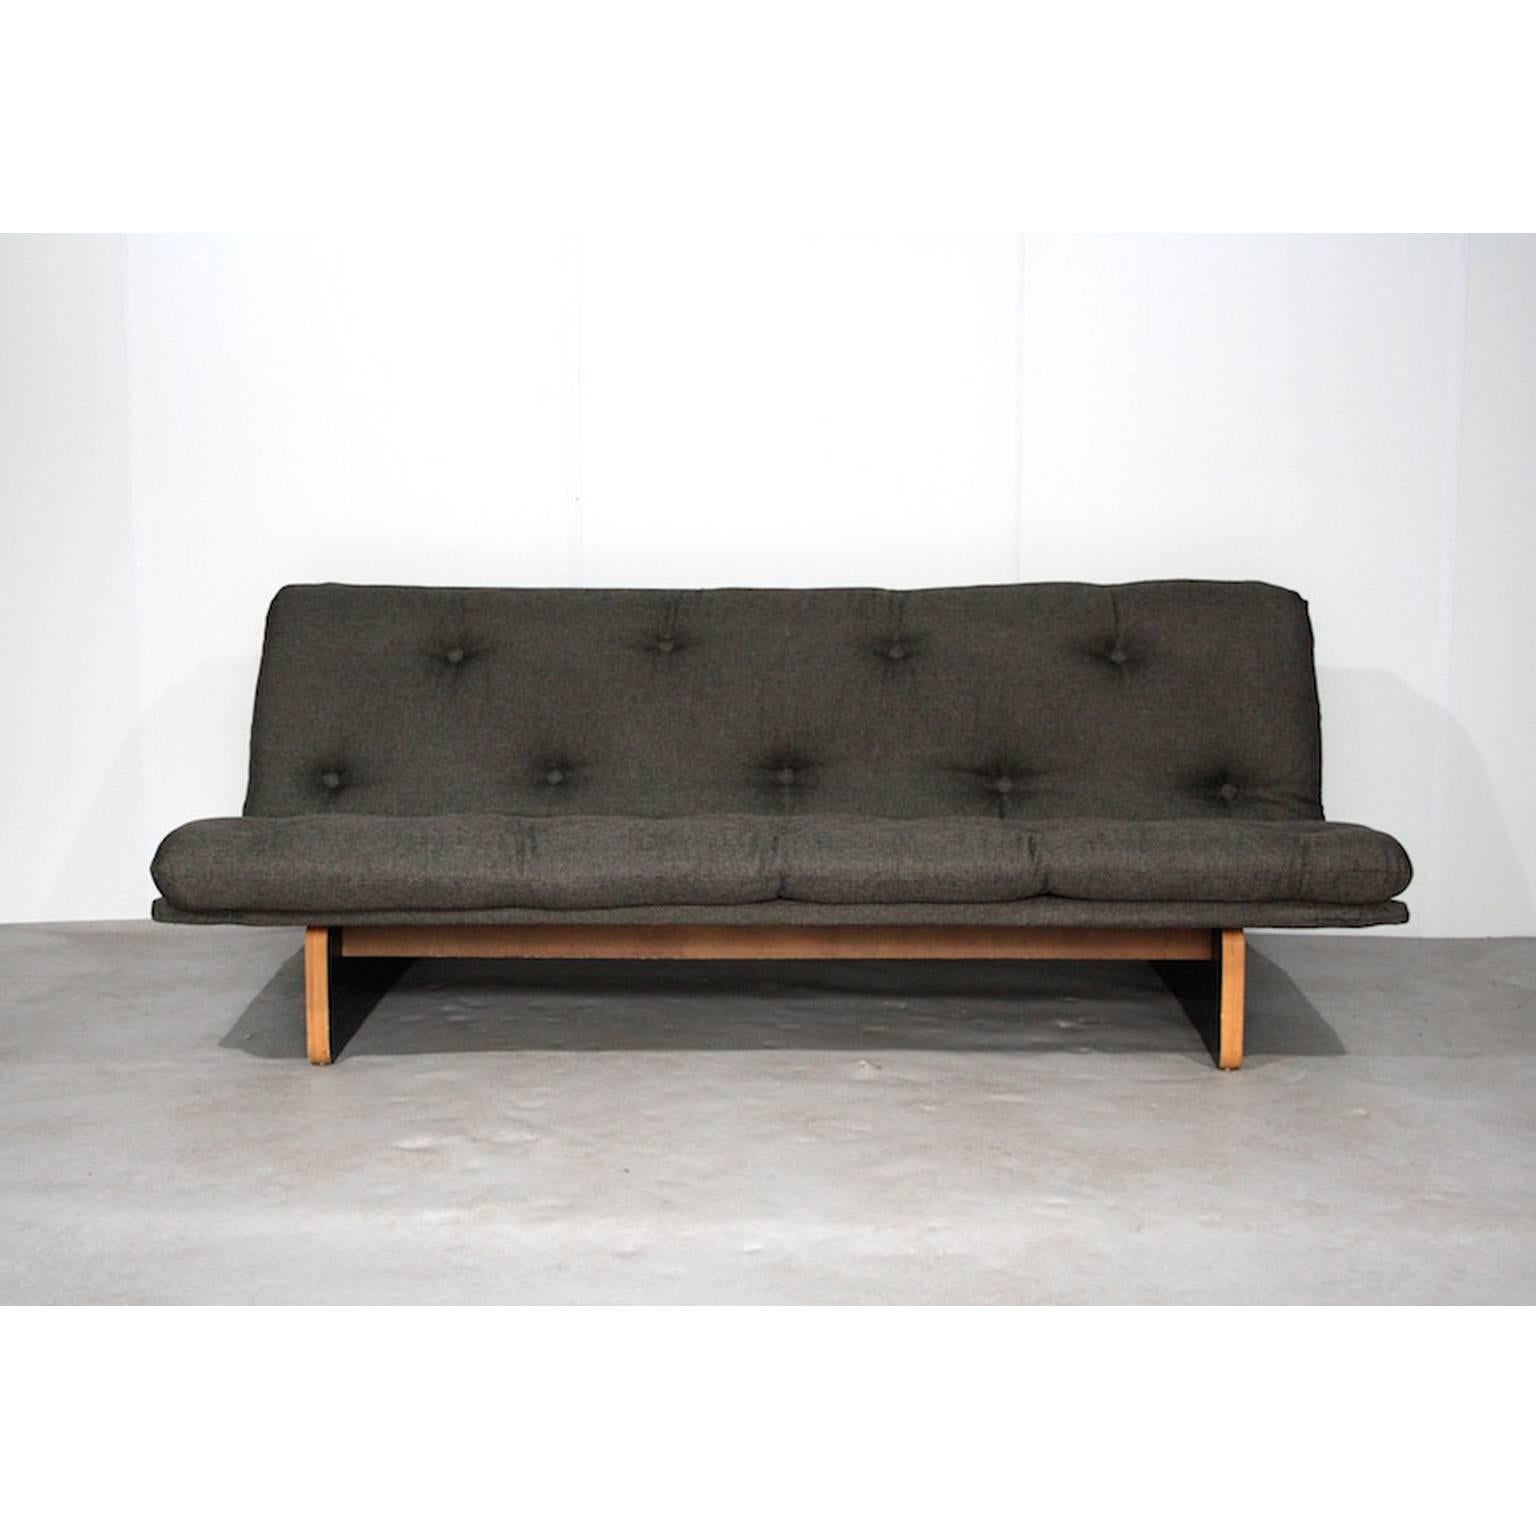 Nice sofa from Artifort designed by Kho Liang Ie. This is the more rare version with the wooden base instead of the metal base (C683). Frame of pressed beech upholstered with moulded foam. With integrated loose seat with new dark army green-grey